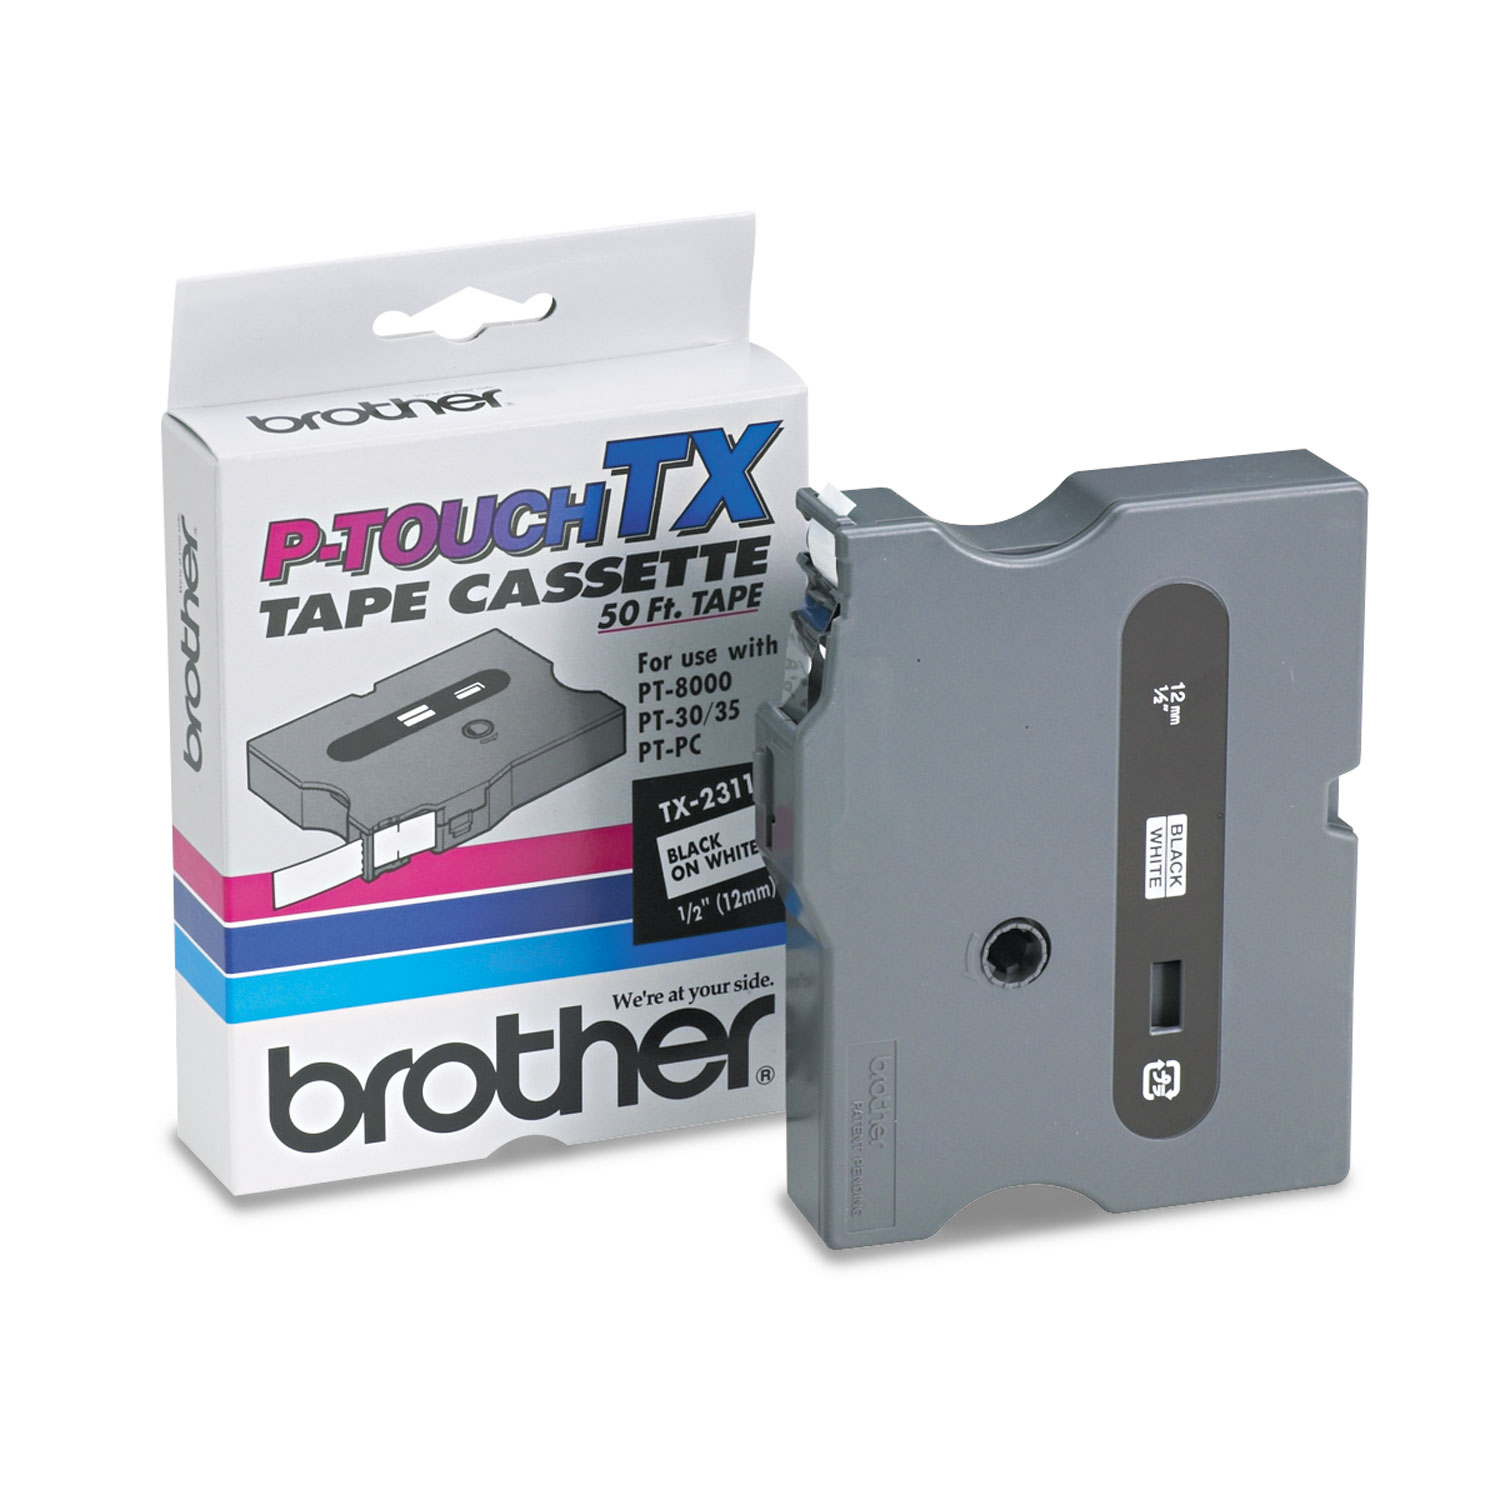  Brother P-Touch TX2311 TX Tape Cartridge for PT-8000, PT-PC, PT-30/35, 0.47 x 50 ft, Black on White (BRTTX2311) 